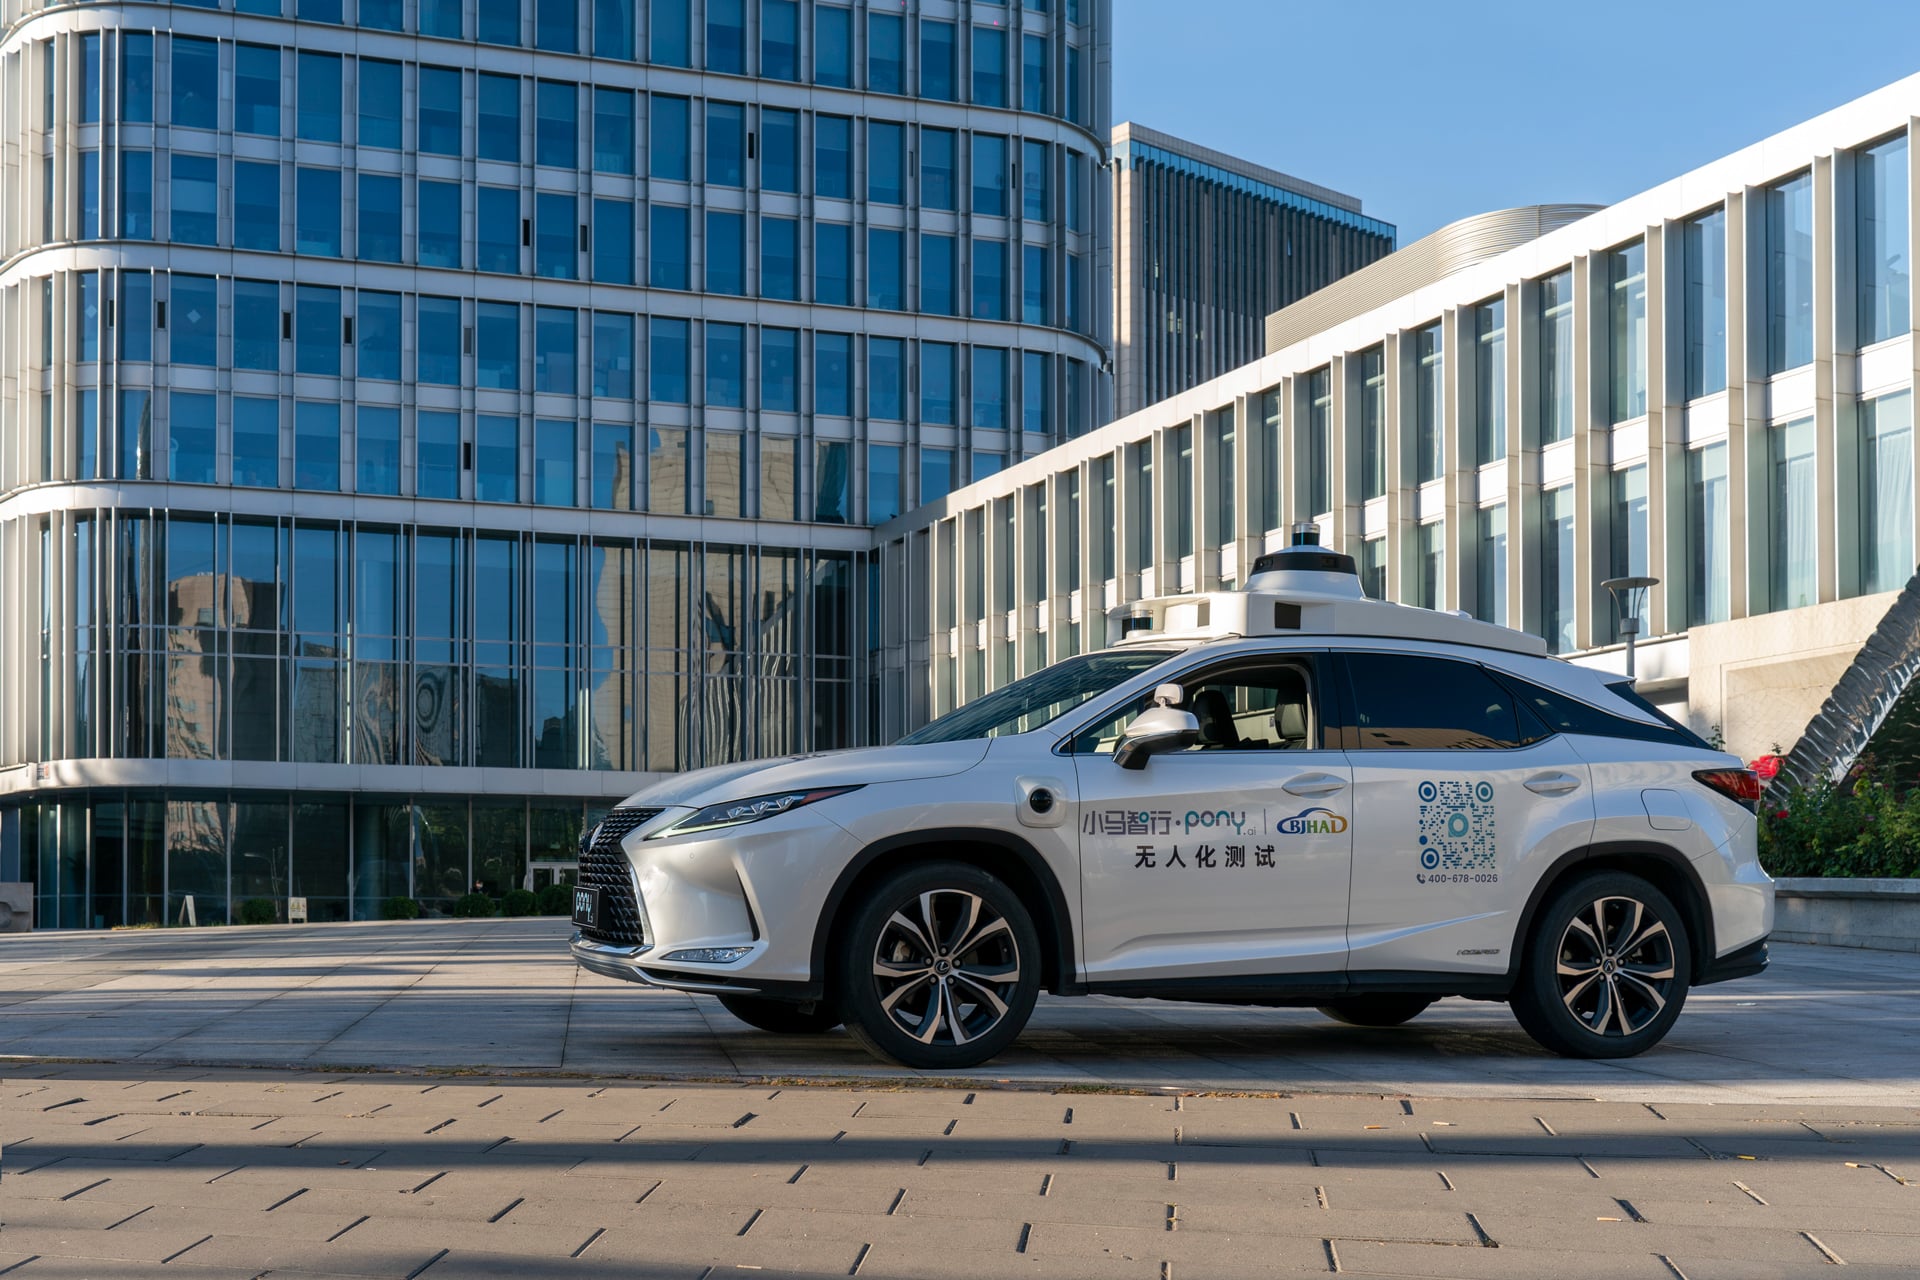 Pony.ai Approved to Deploy Fully Driverless L4 Autonomous Vehicles in Beijing